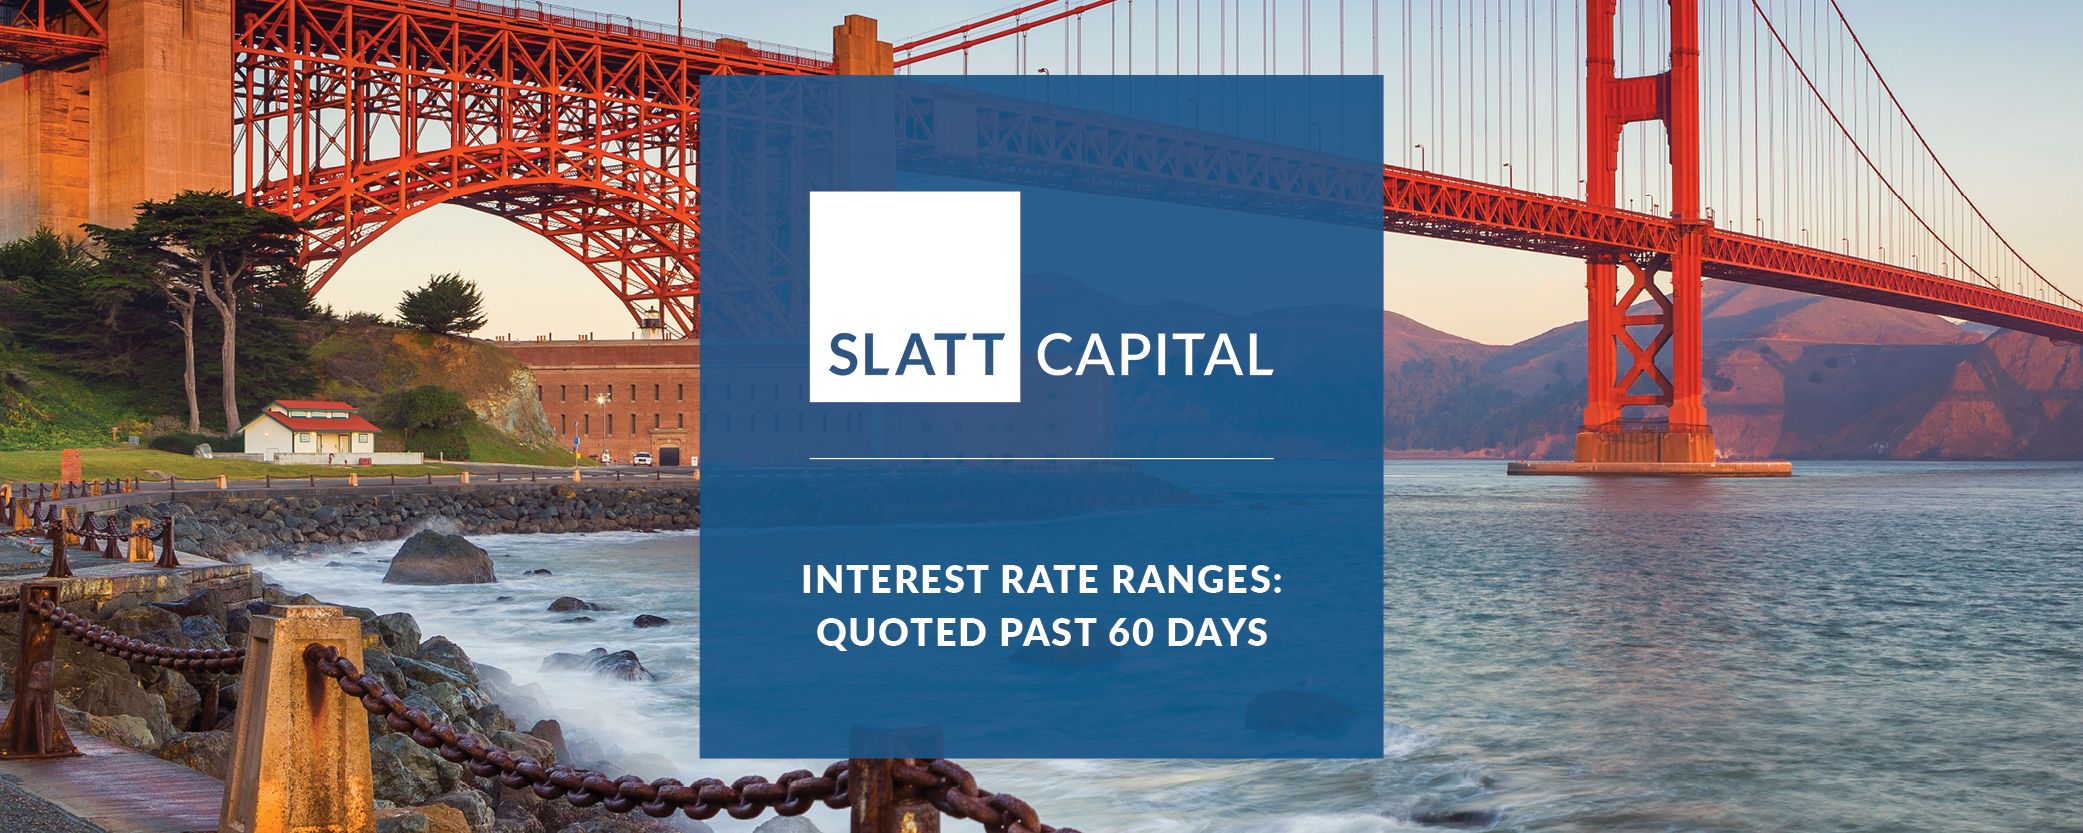 November cre interest rate range & lowest rate: past 60 days